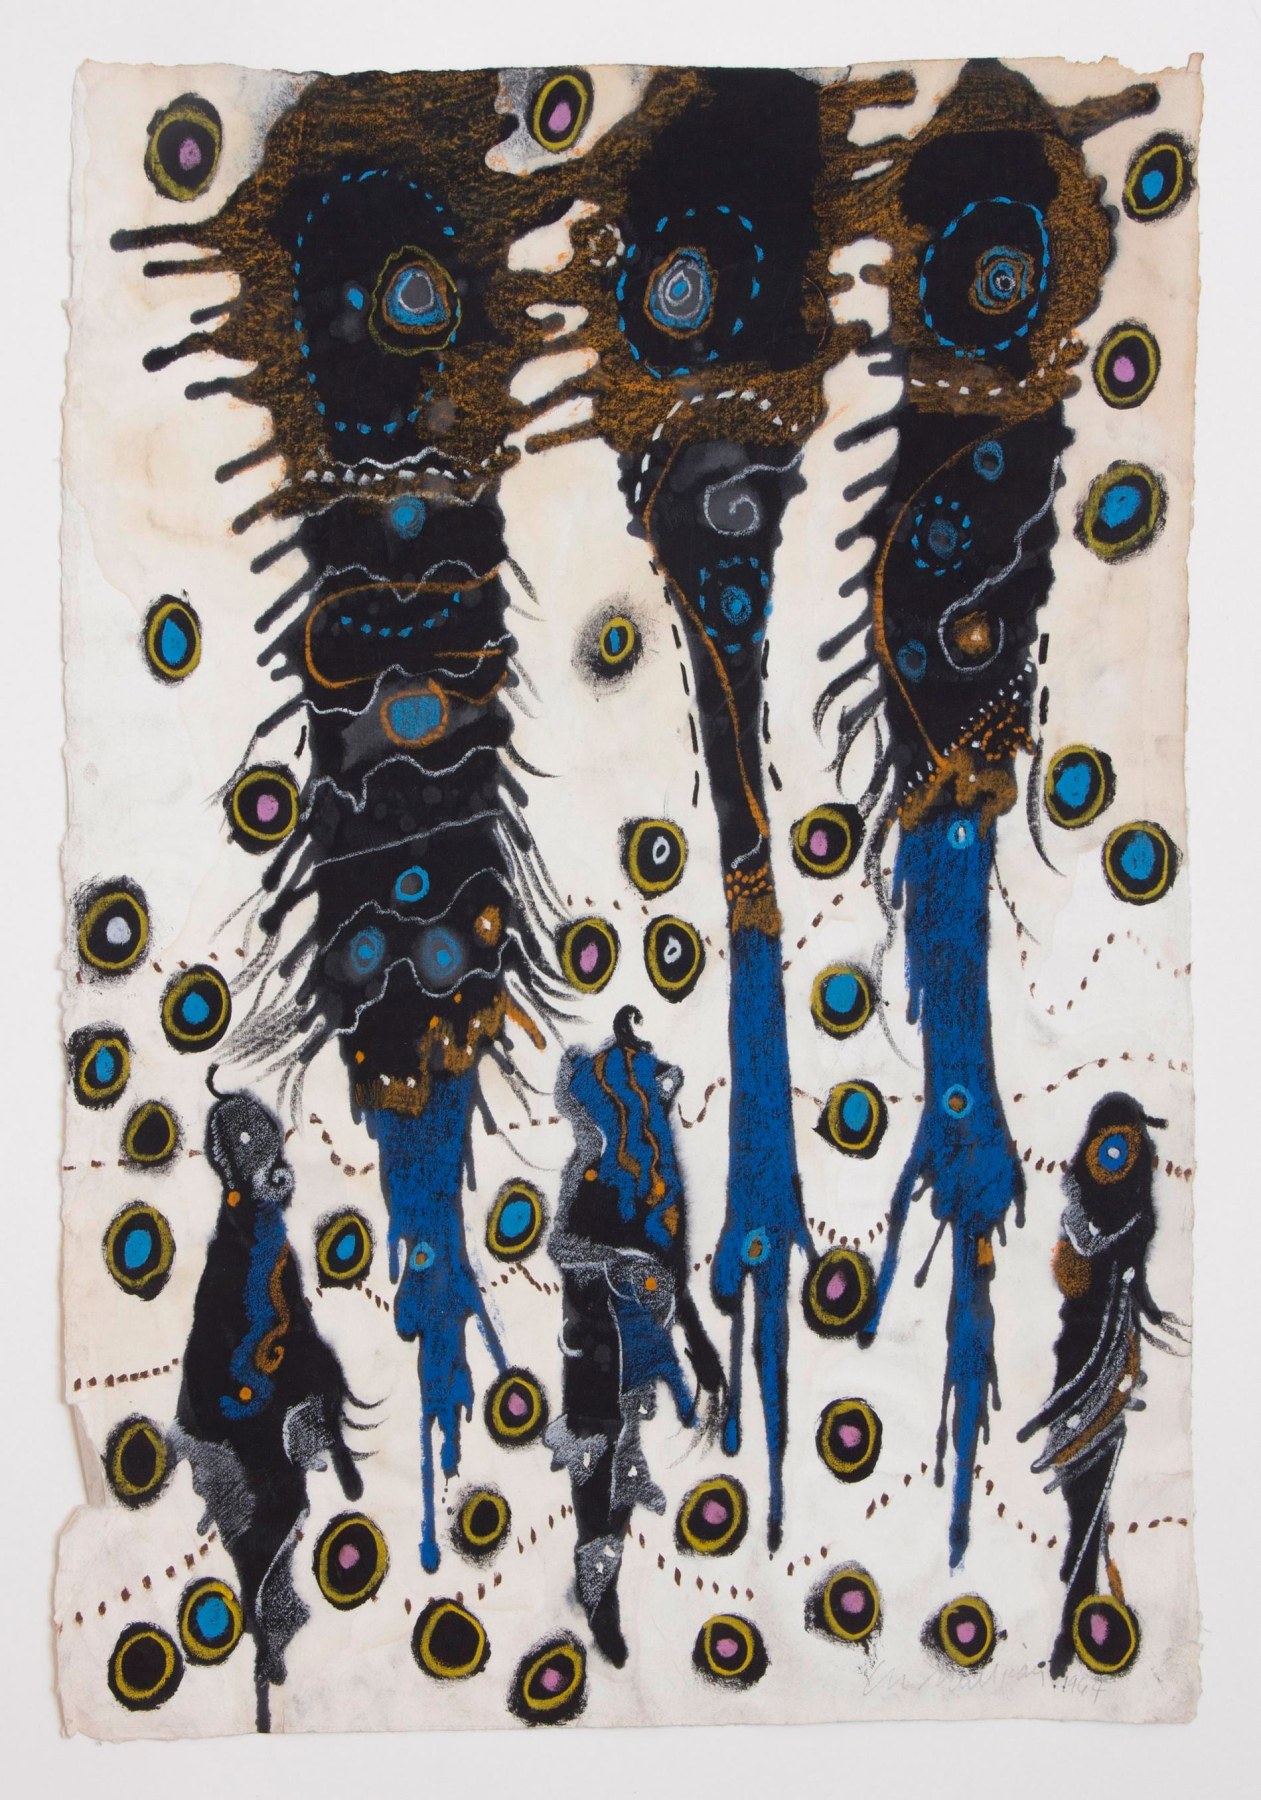 Image of LEE MULLICAN's Wedding Party, 1964